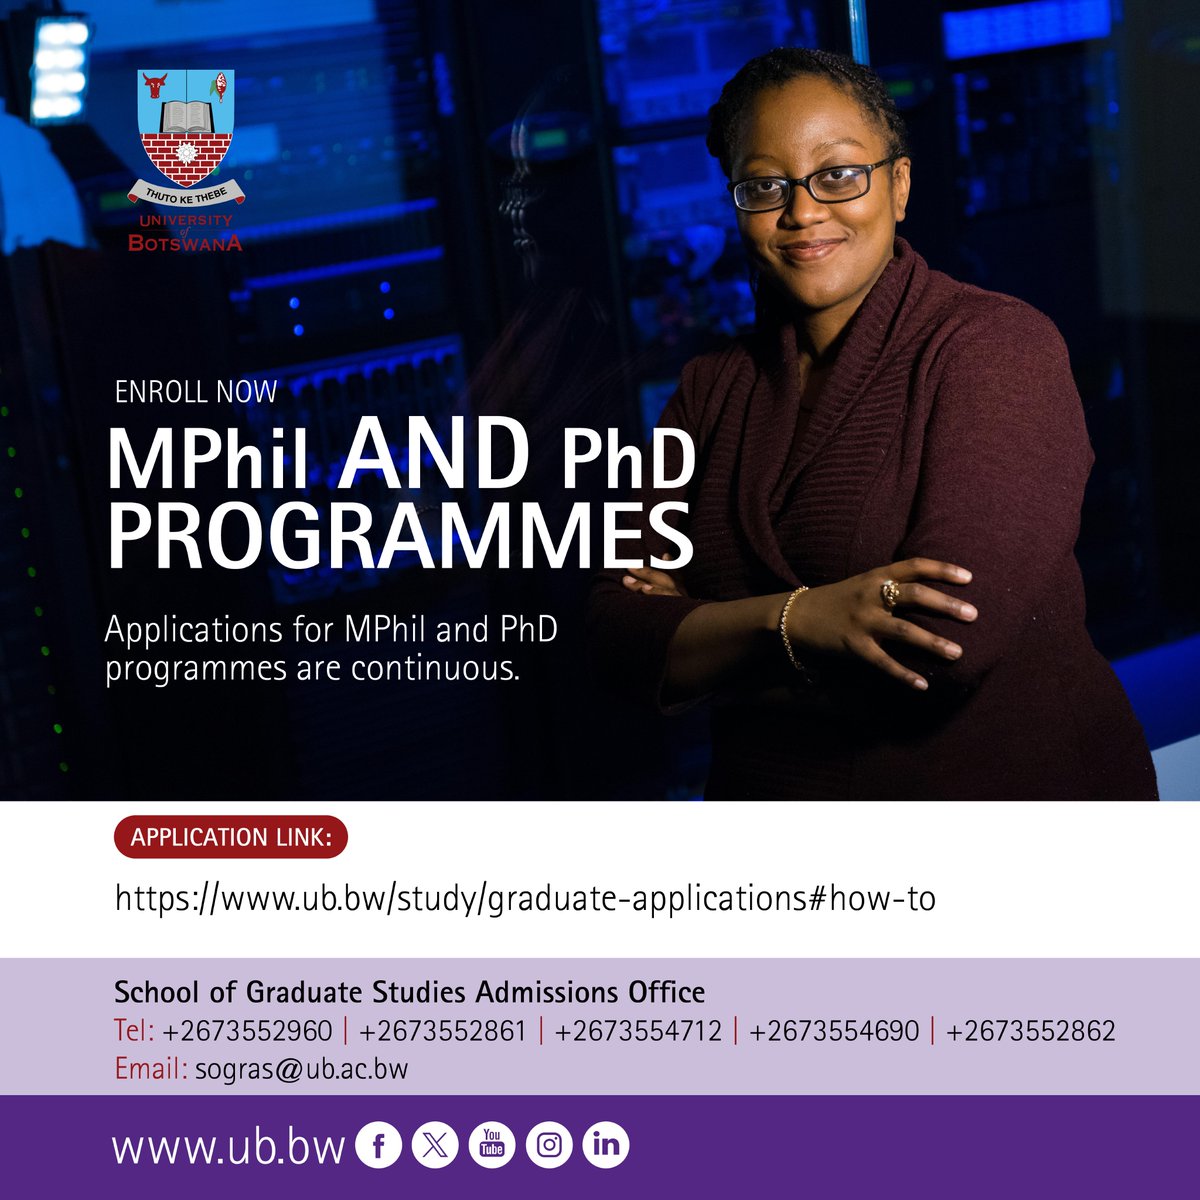 Applications for Mphil and PhD programmes are continuous.
#EnrollNow: ub.bw/study/graduate…